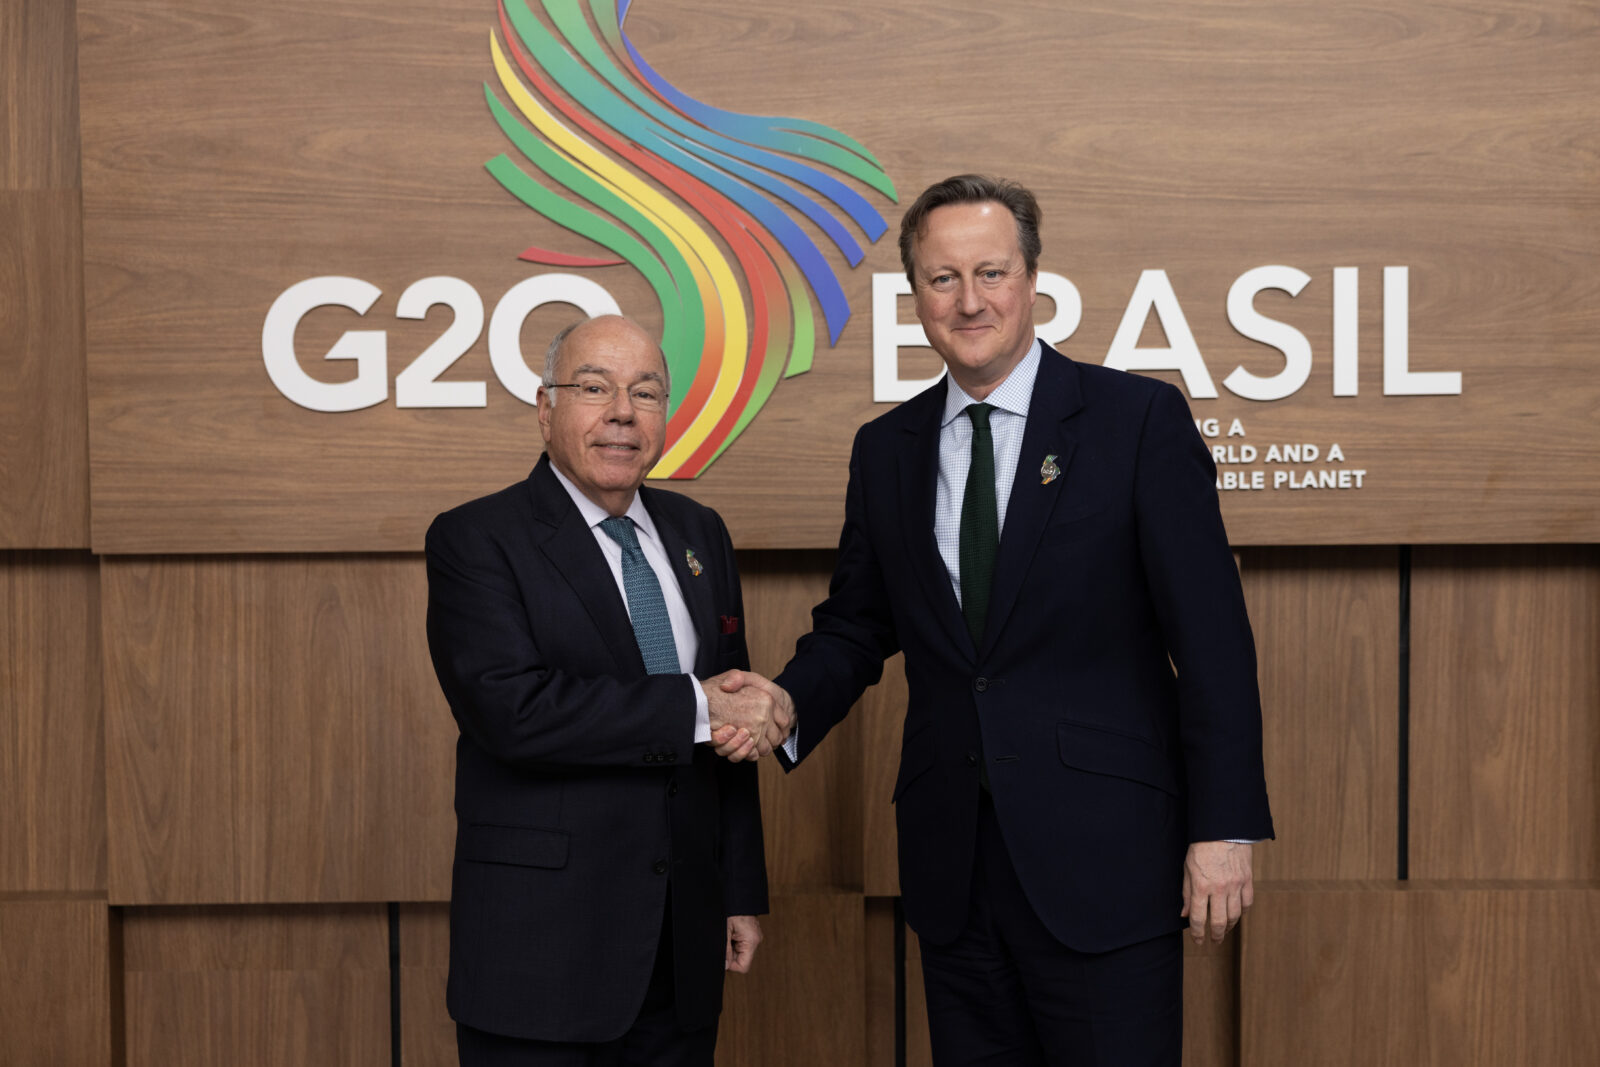 Rio De Janeiro, Brazil. Foreign Secretary David Cameron meets Brazil Foreign Minister Foreign Minister Mauro Vieira for a bilateral meeting as he attends day two of the Foreign Ministers G20 Summit in Brazil.